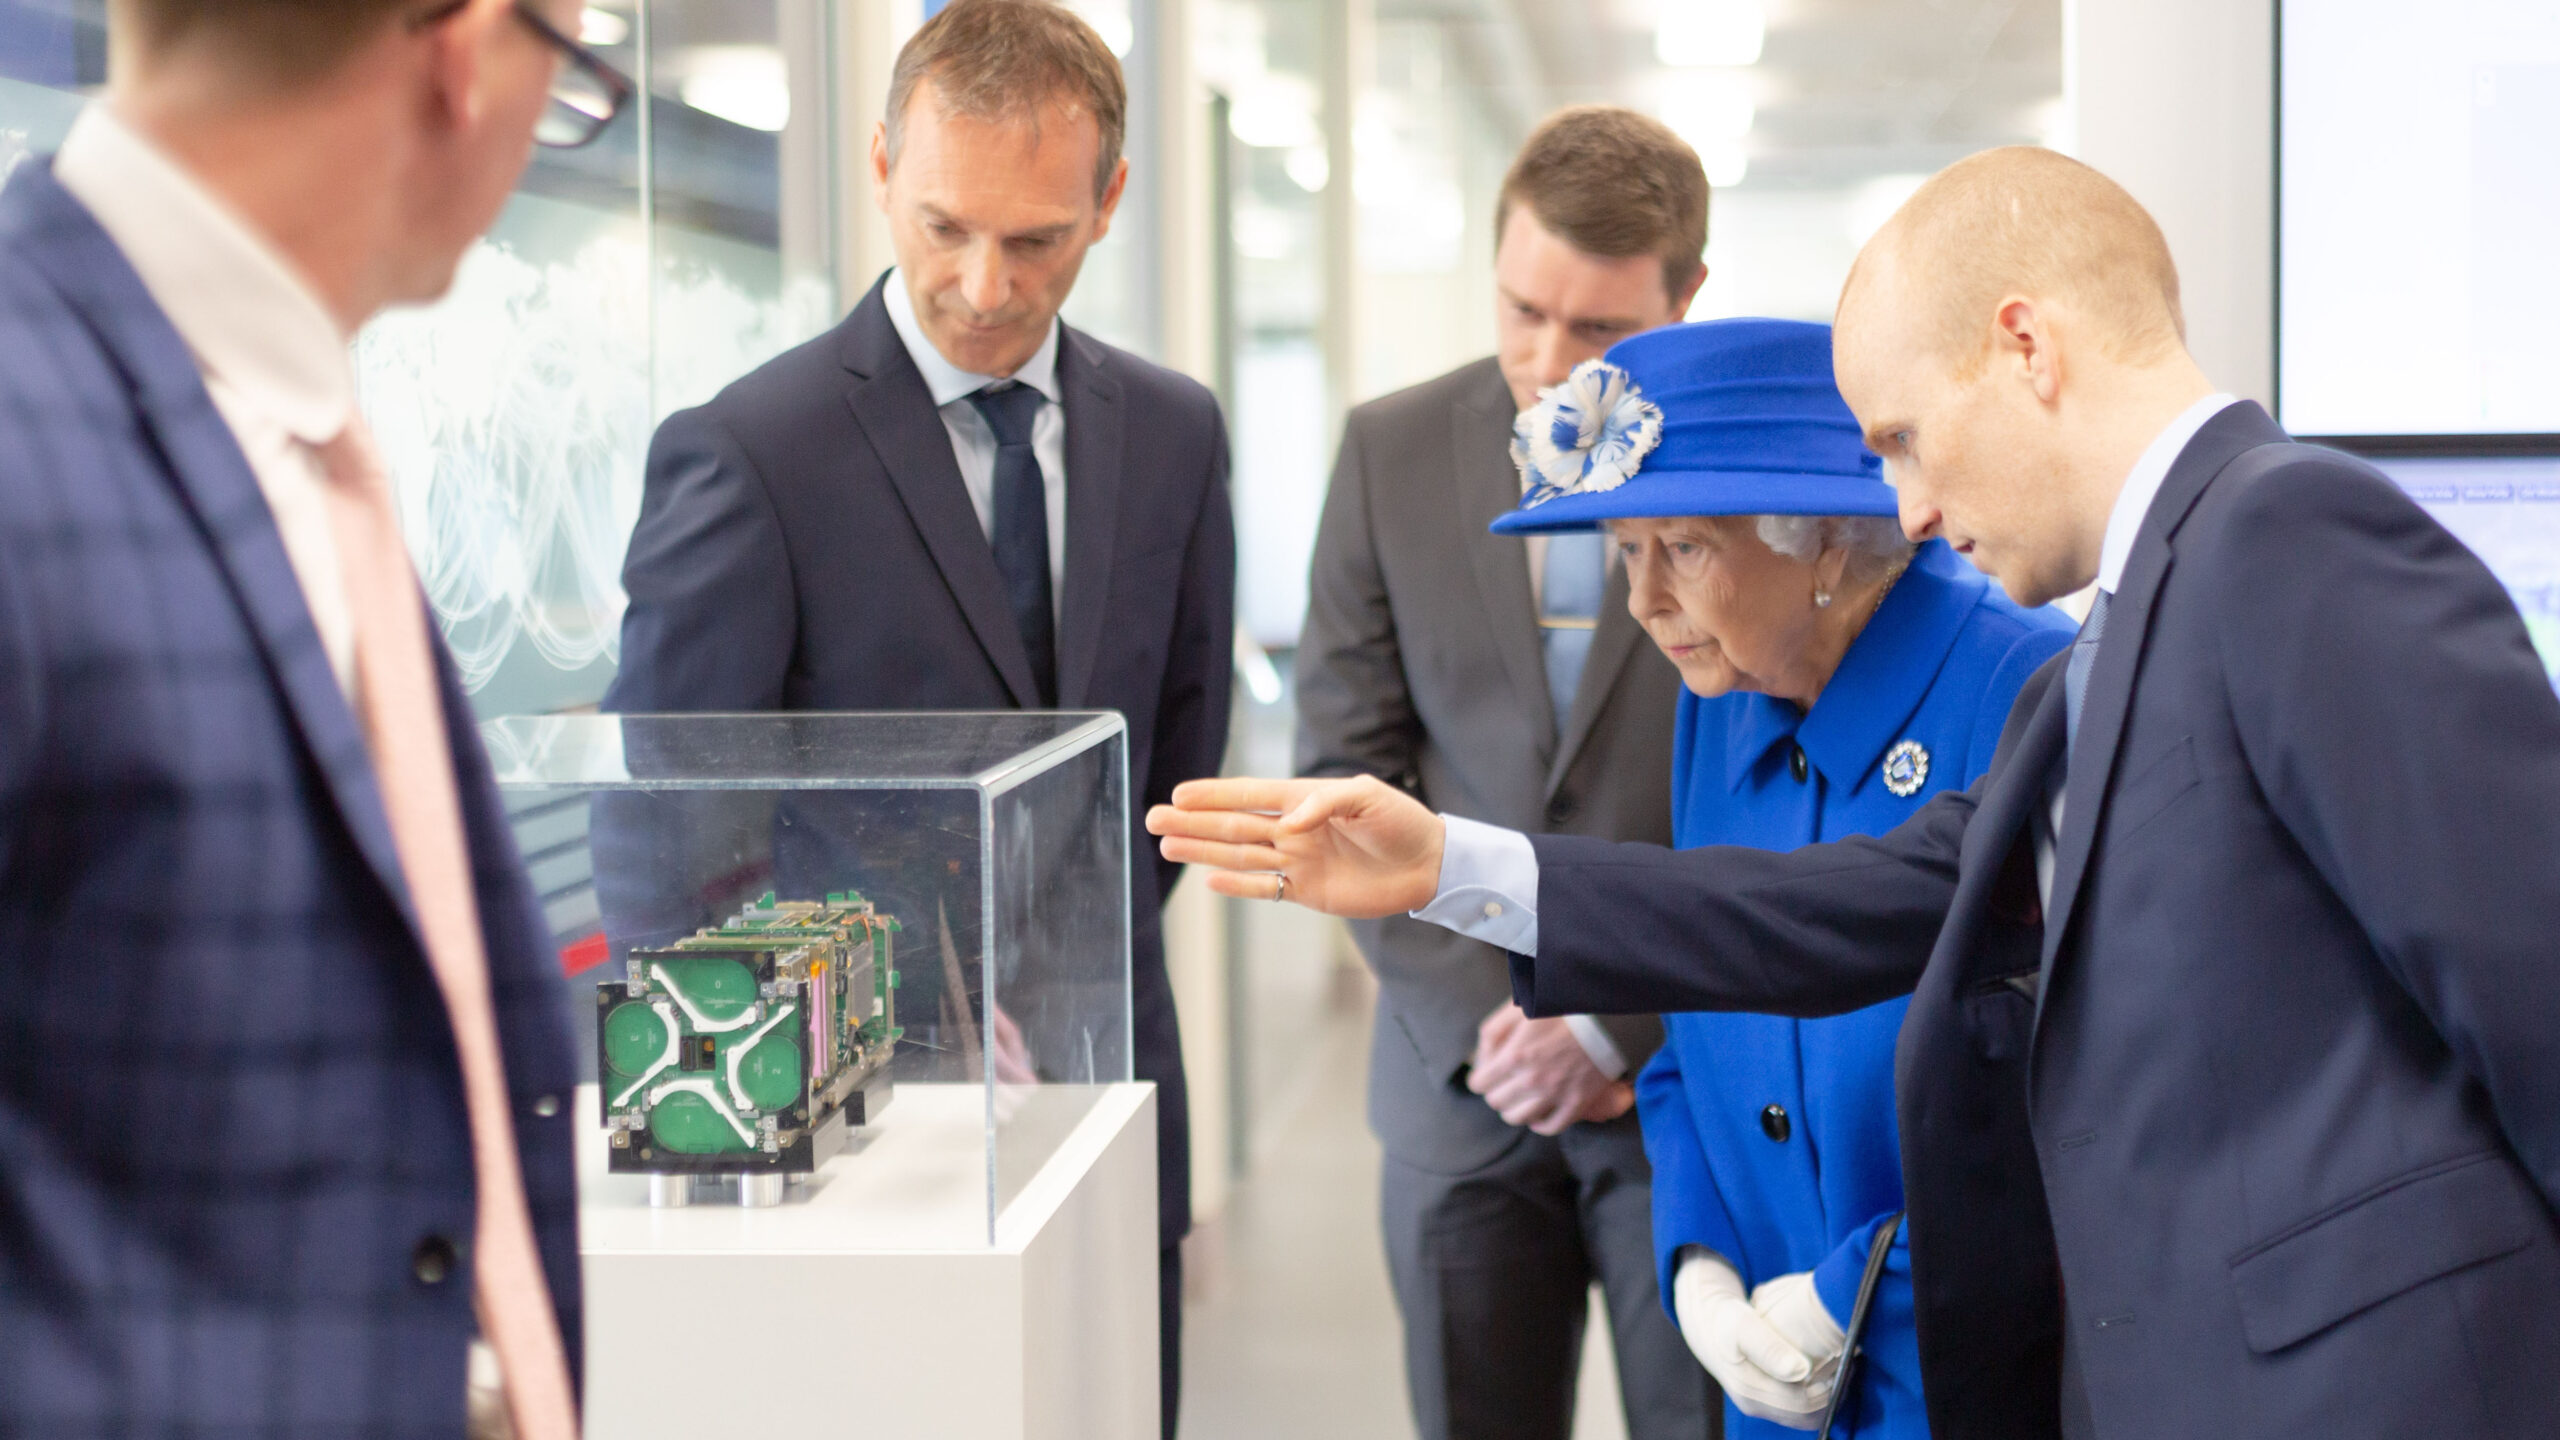 The Queen Visits Scottish Space Centre to Examine Earth-Observing Satellites